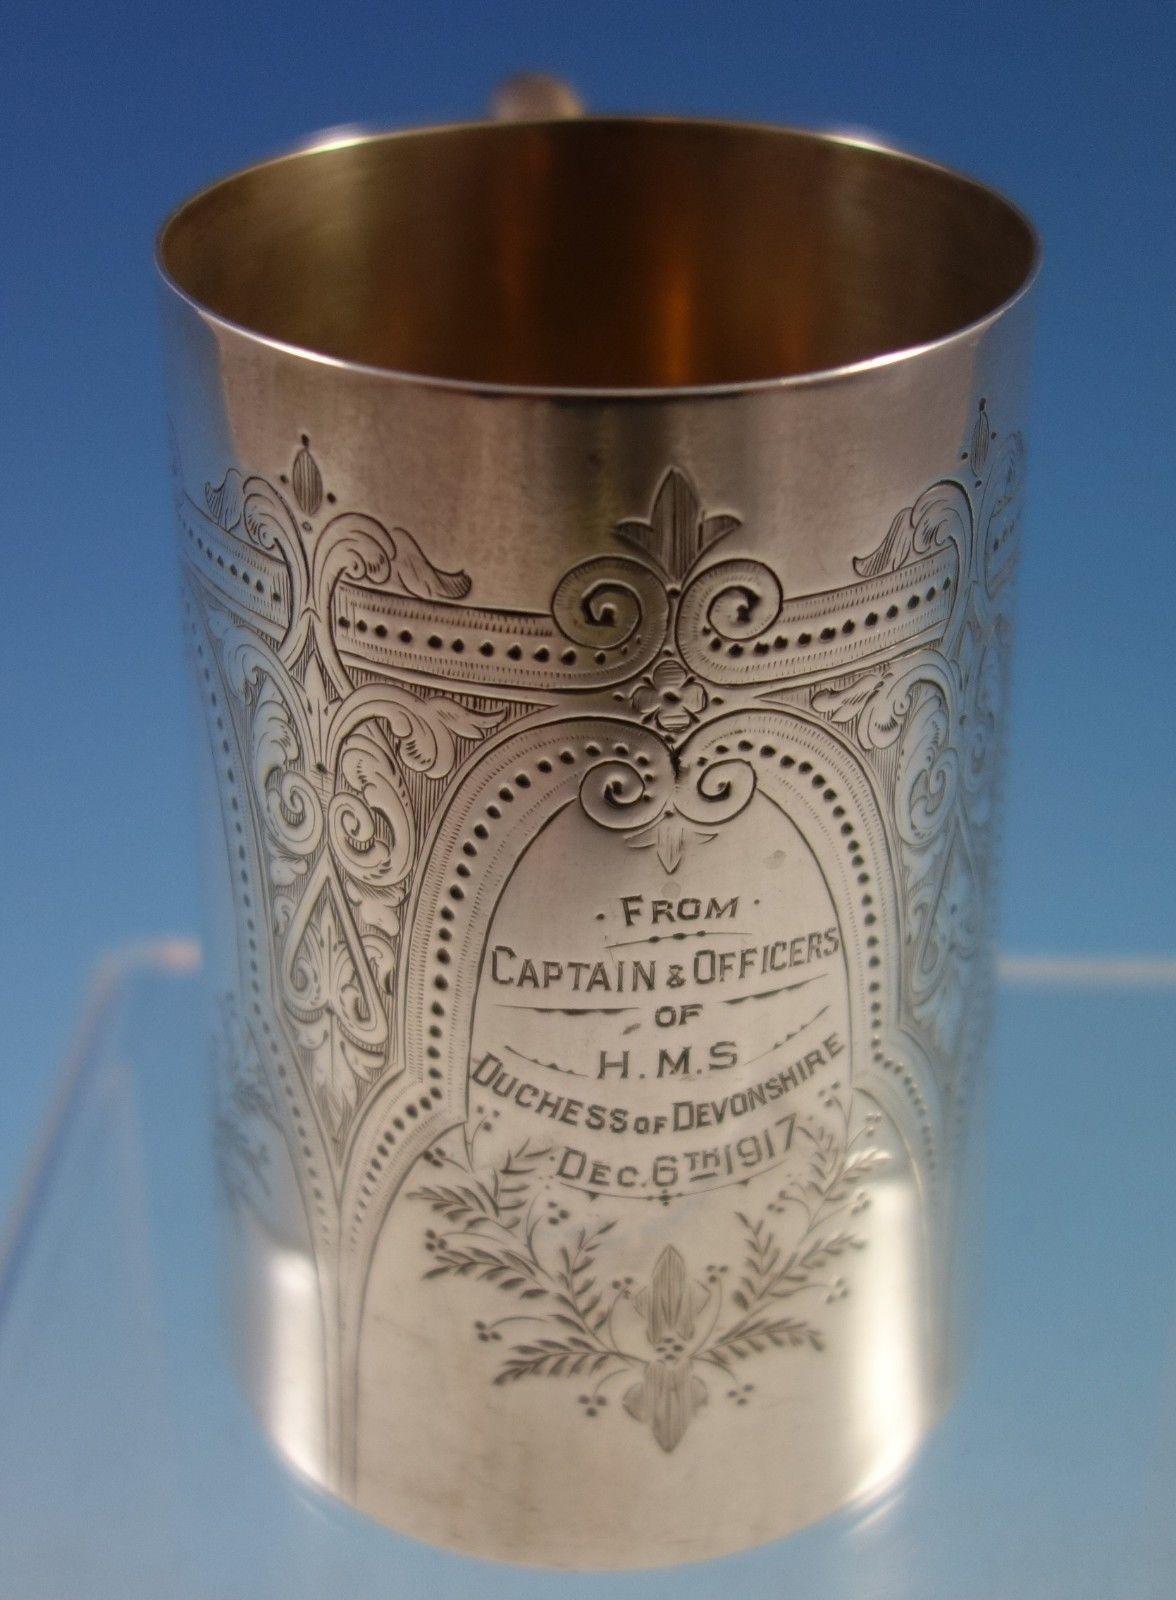 English sterling silver baby cup made by Edward Charles Brown London in 1914. The cup is bright-cut and chased with an inscription that reads, From Captain and Officers of HMS Duchess of Devonshire Dec. 6th 1917. The piece is marked with #4020 and